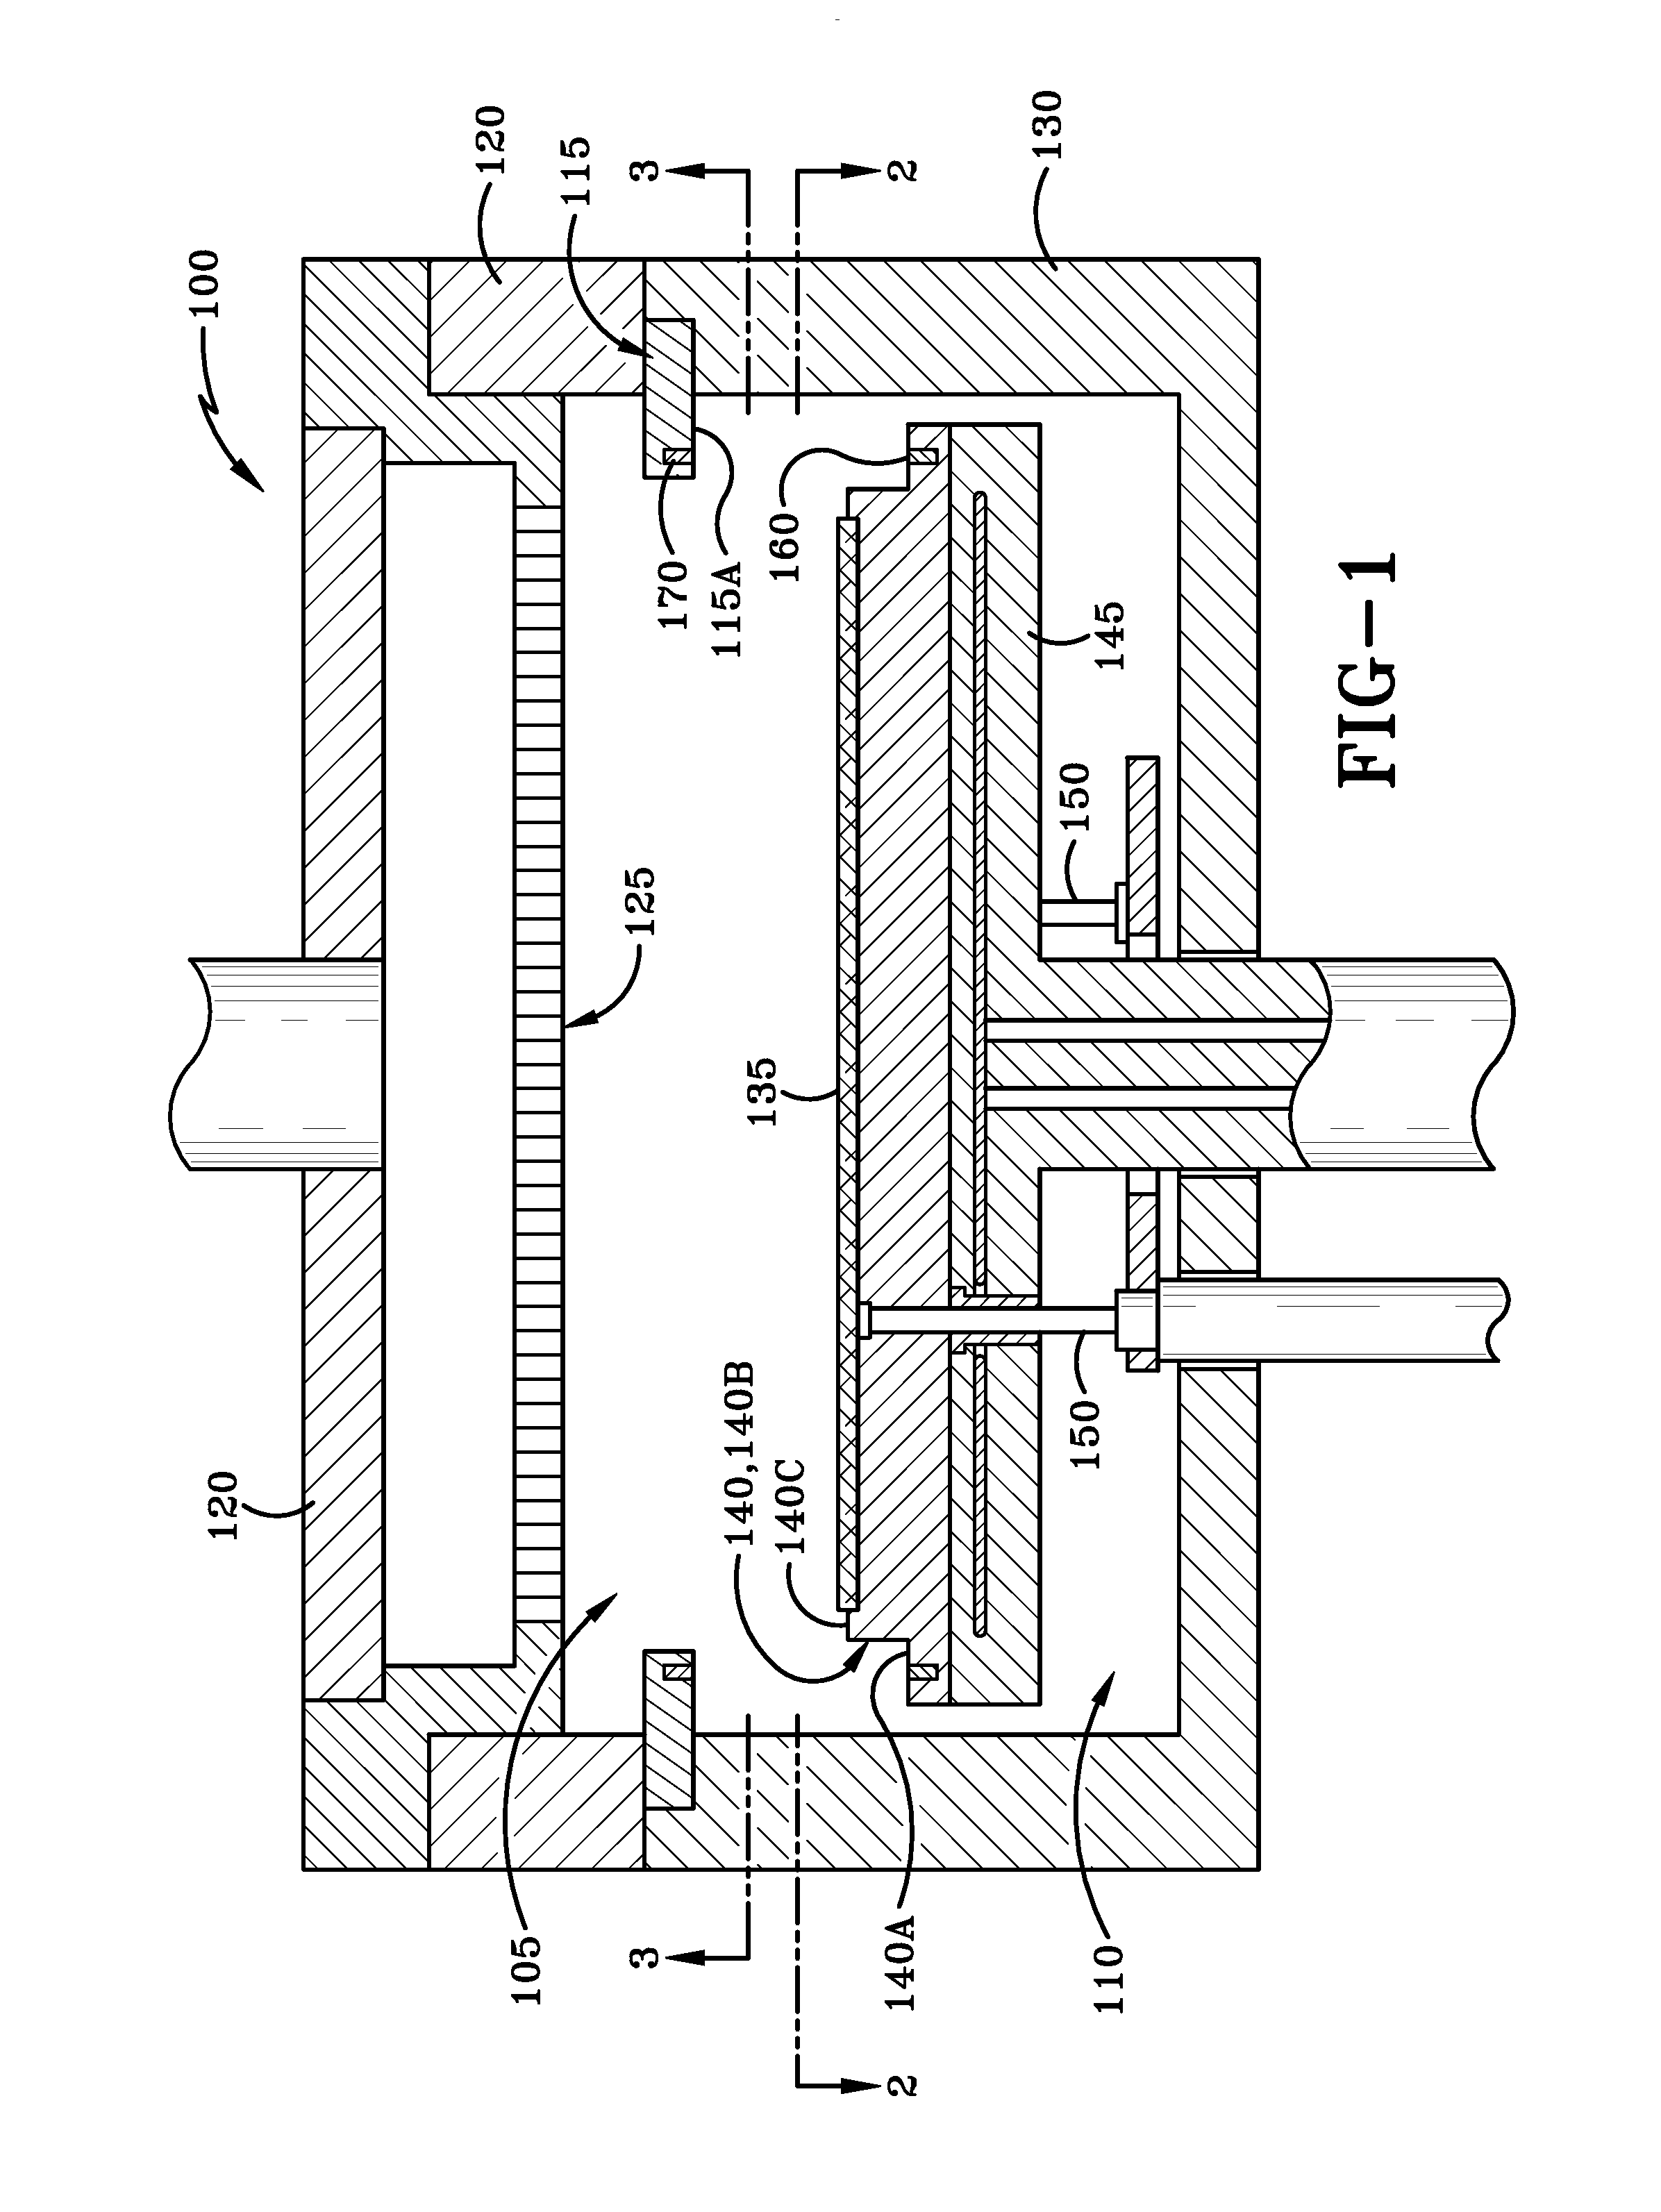 Magnetic susceptor to baseplate seal